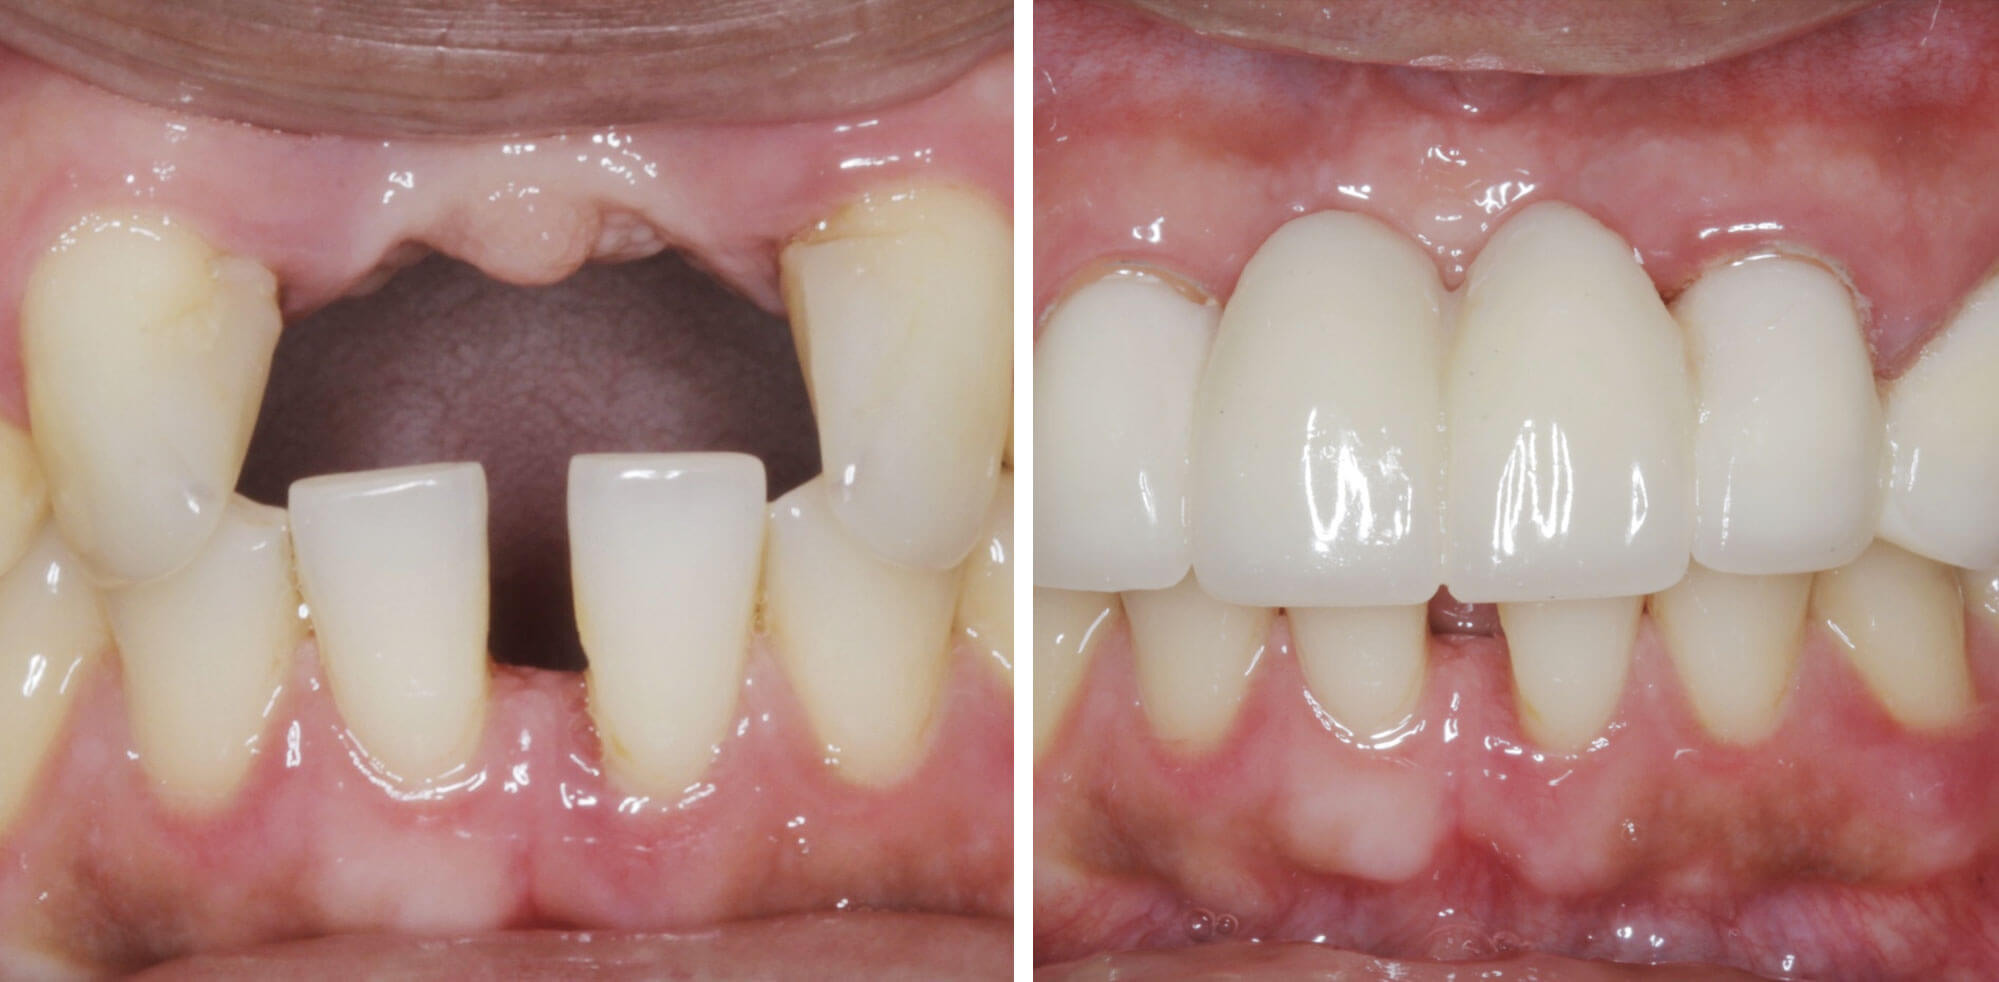 image of a patient's smile before and after tooth replacement